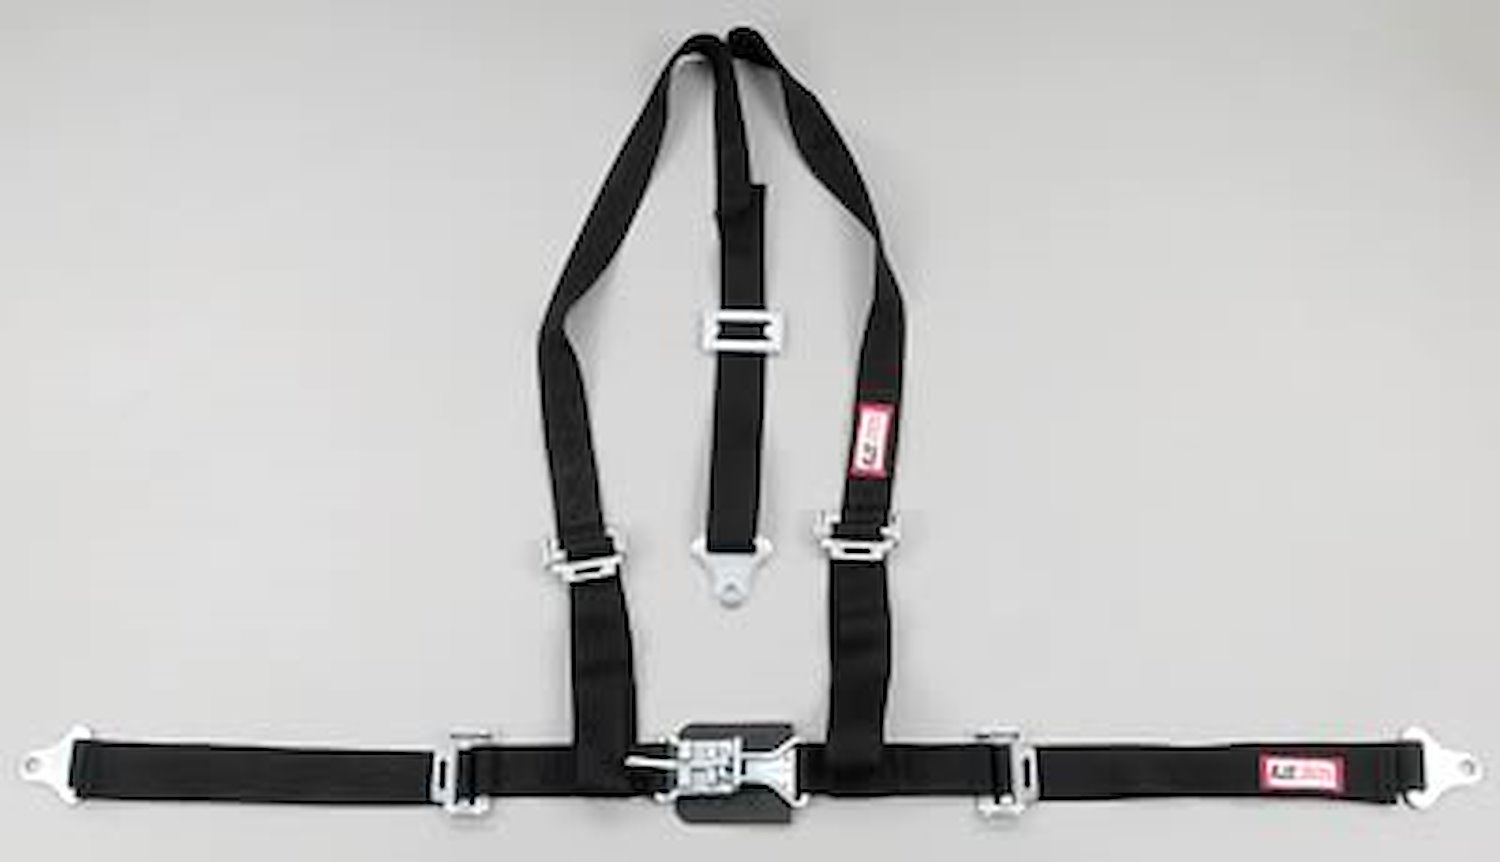 NON-SFI L&L HARNESS 2 PULL UP Lap Belt SEWN IN 2 S.H. Y FLOOR Mount ALL WRAP ENDS YELLOW